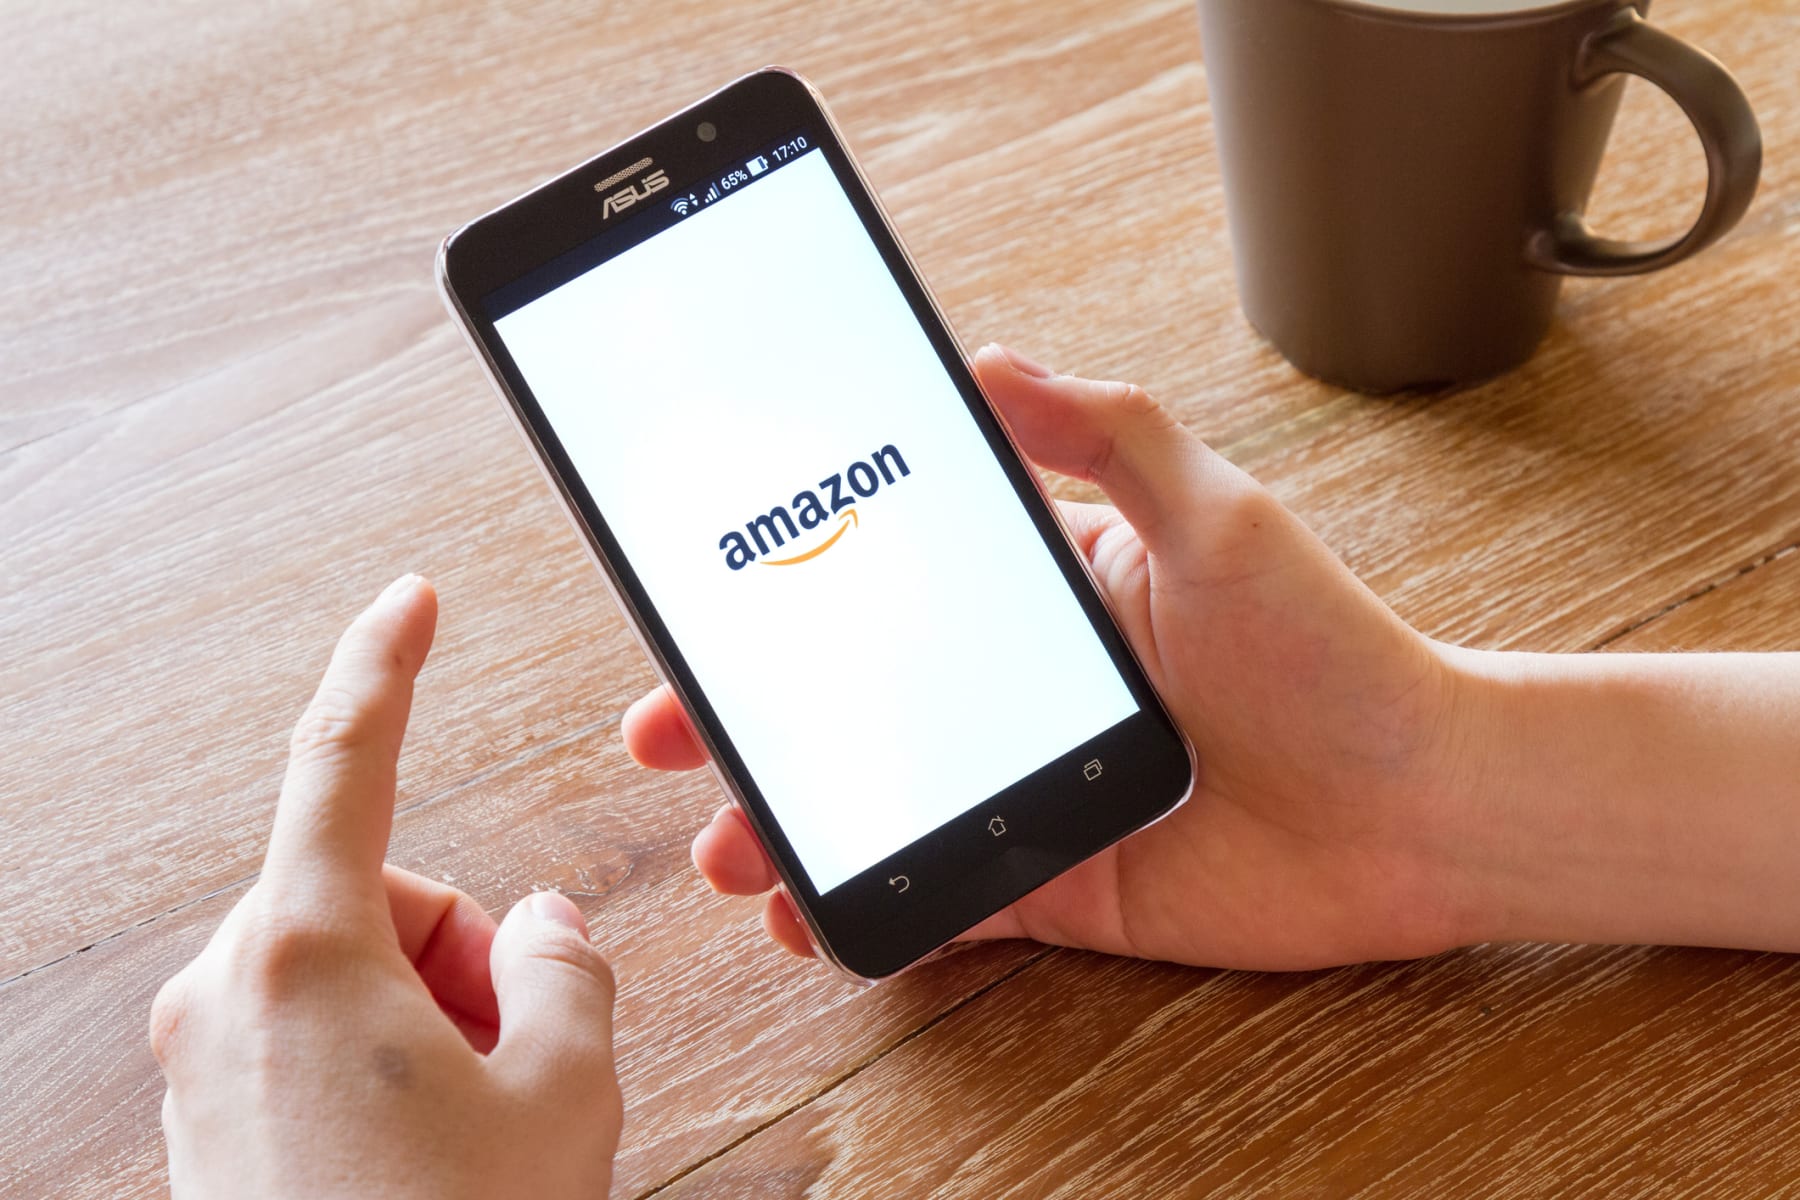 Person holds phone displaying the Amazon logo.